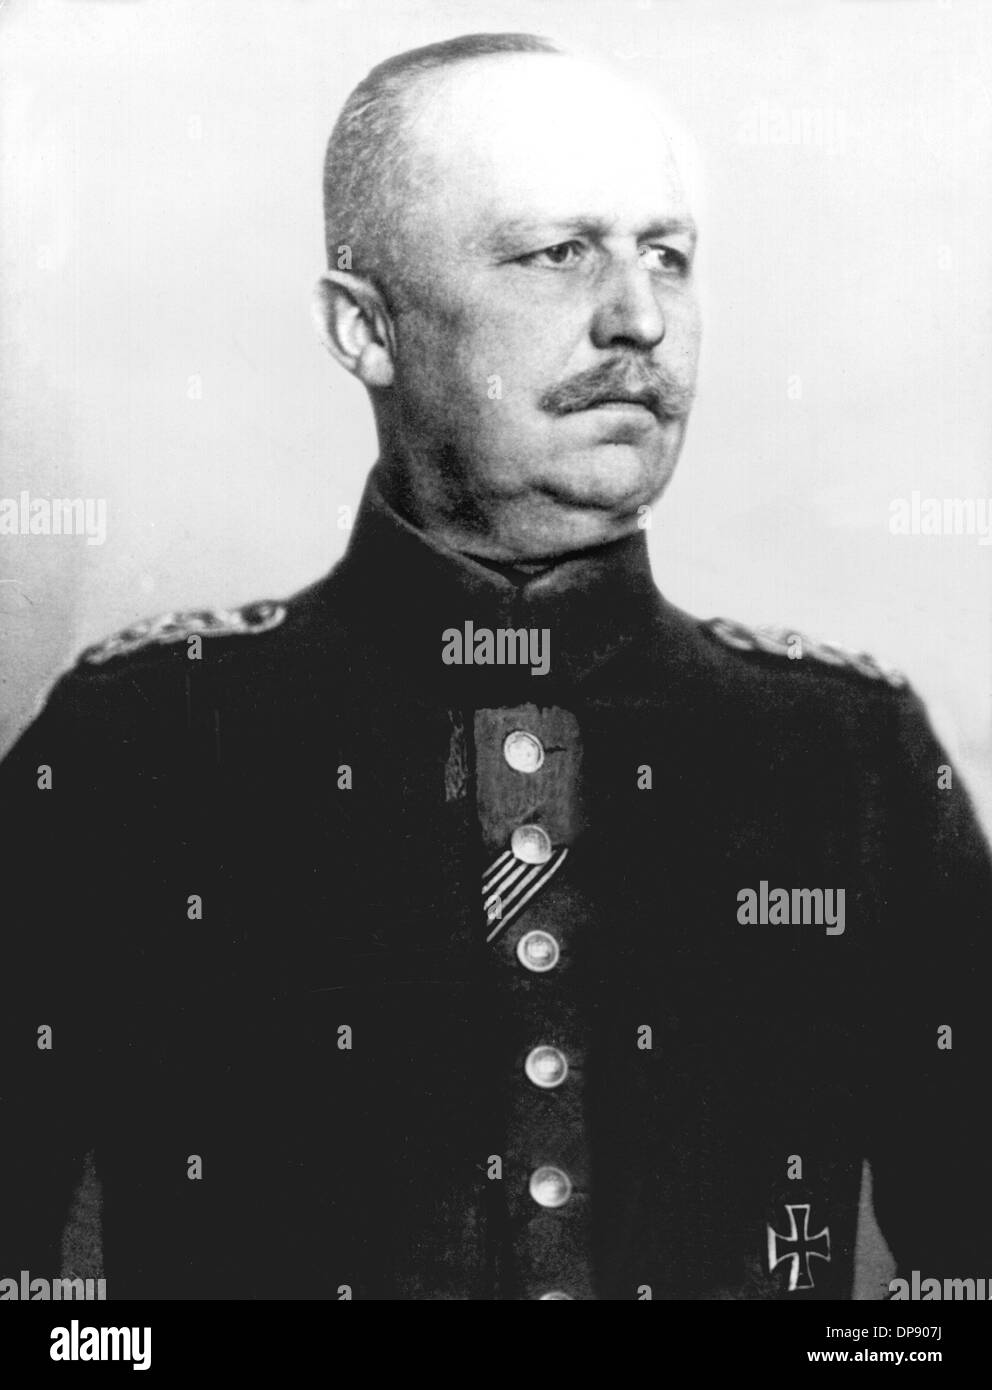 A contemporary photograph of Prussian general and military leader (Battle of Tannenberg 1914) Erich Ludendorff, who effectively decided together with Paul von Hindenburg about German politics during World War I. After the military failure, he stepped back and was dismissed by Emperor Wilhelm II. on the 26th of October in 1918. Stock Photo